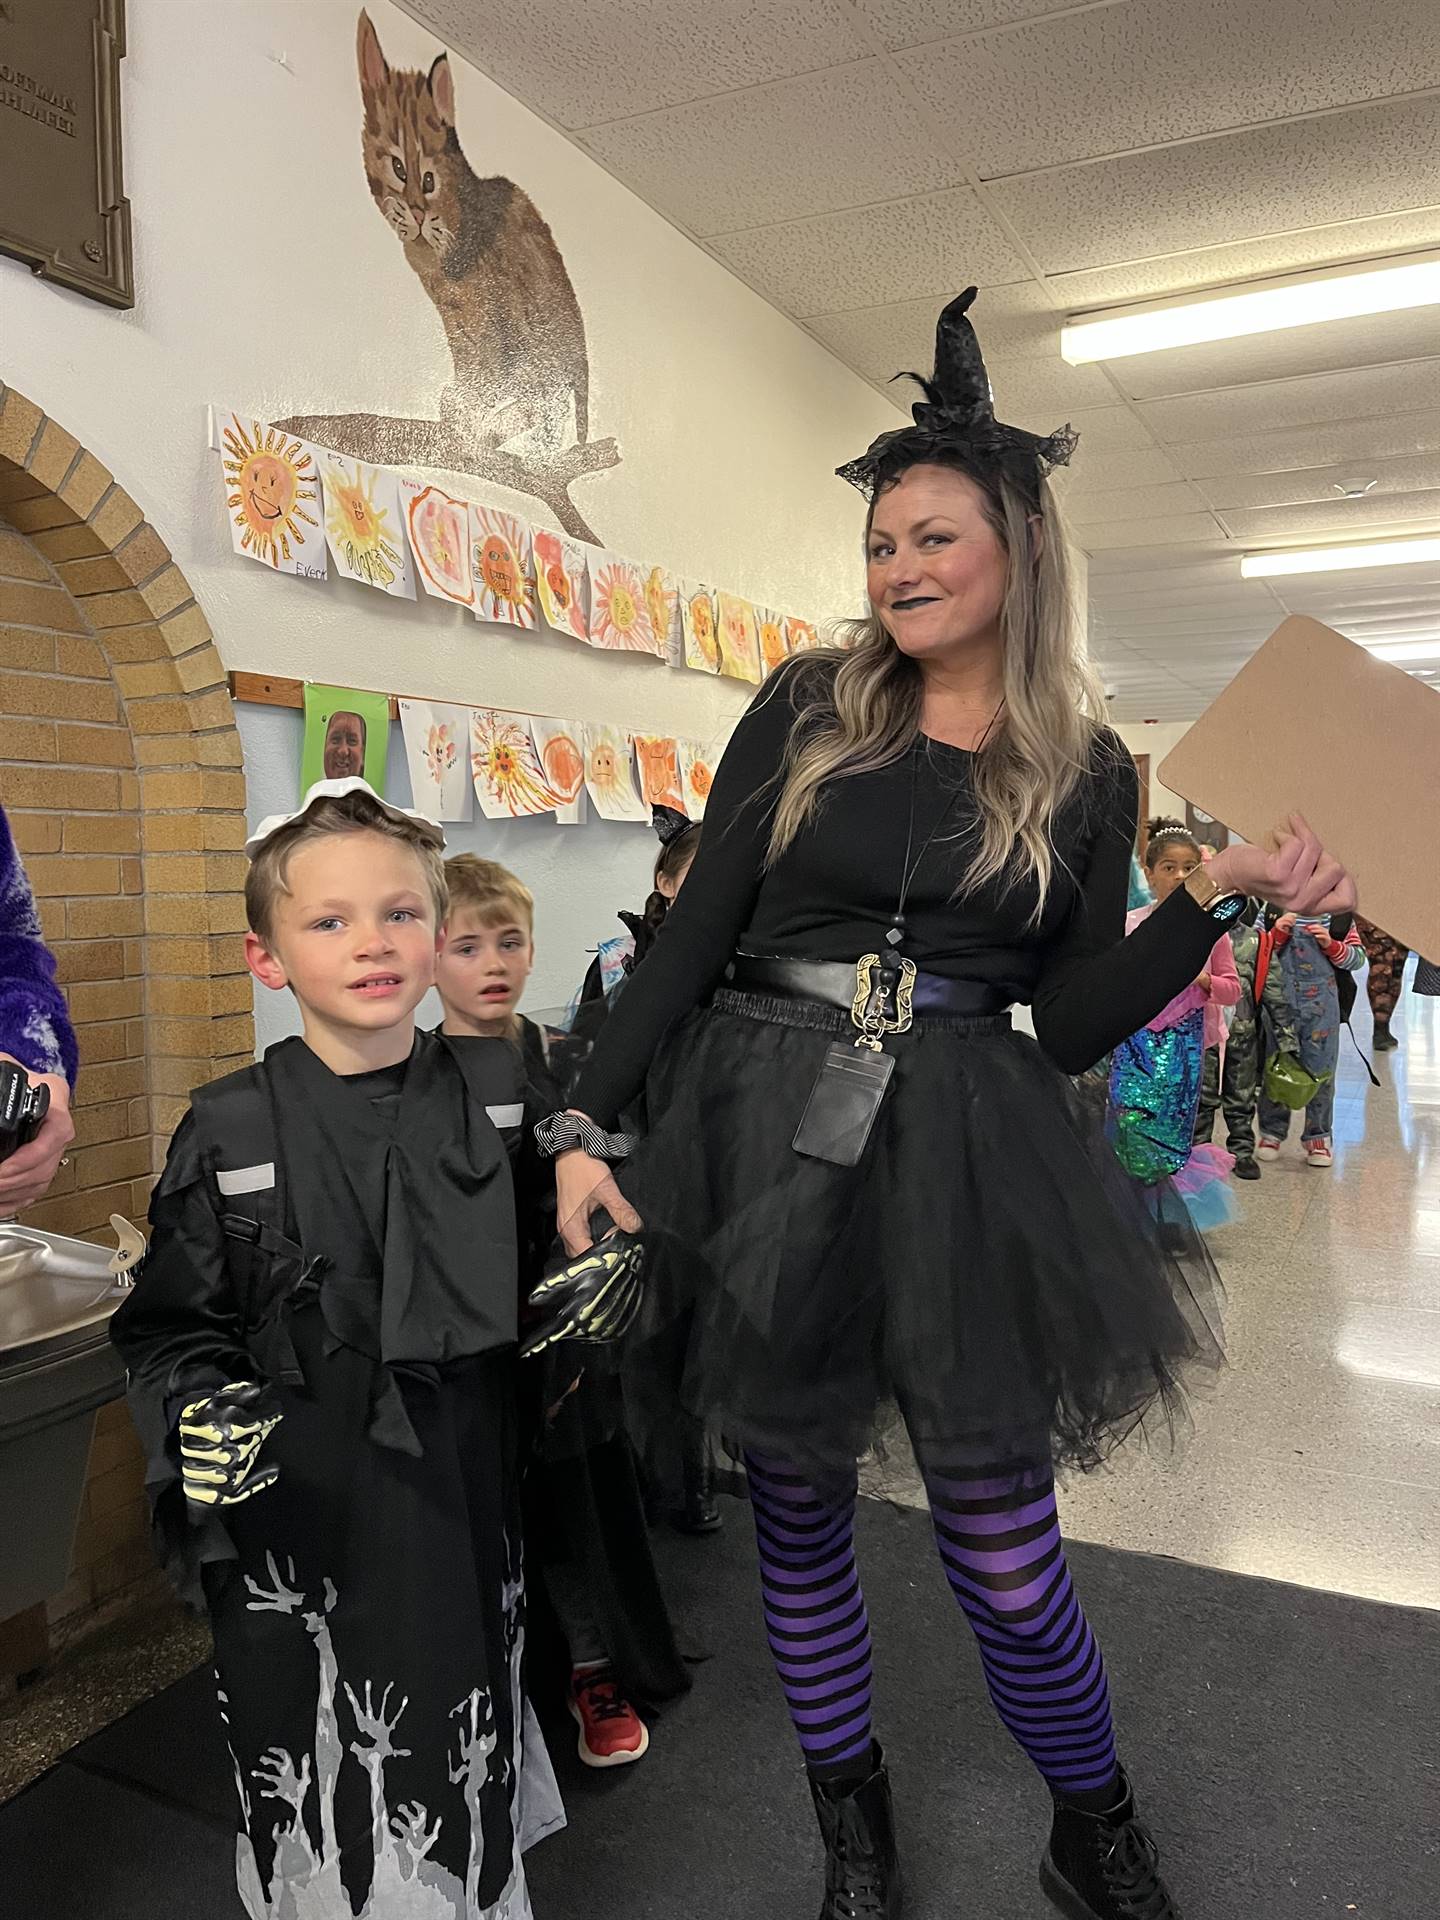 A teacher witch and a student dressed up.